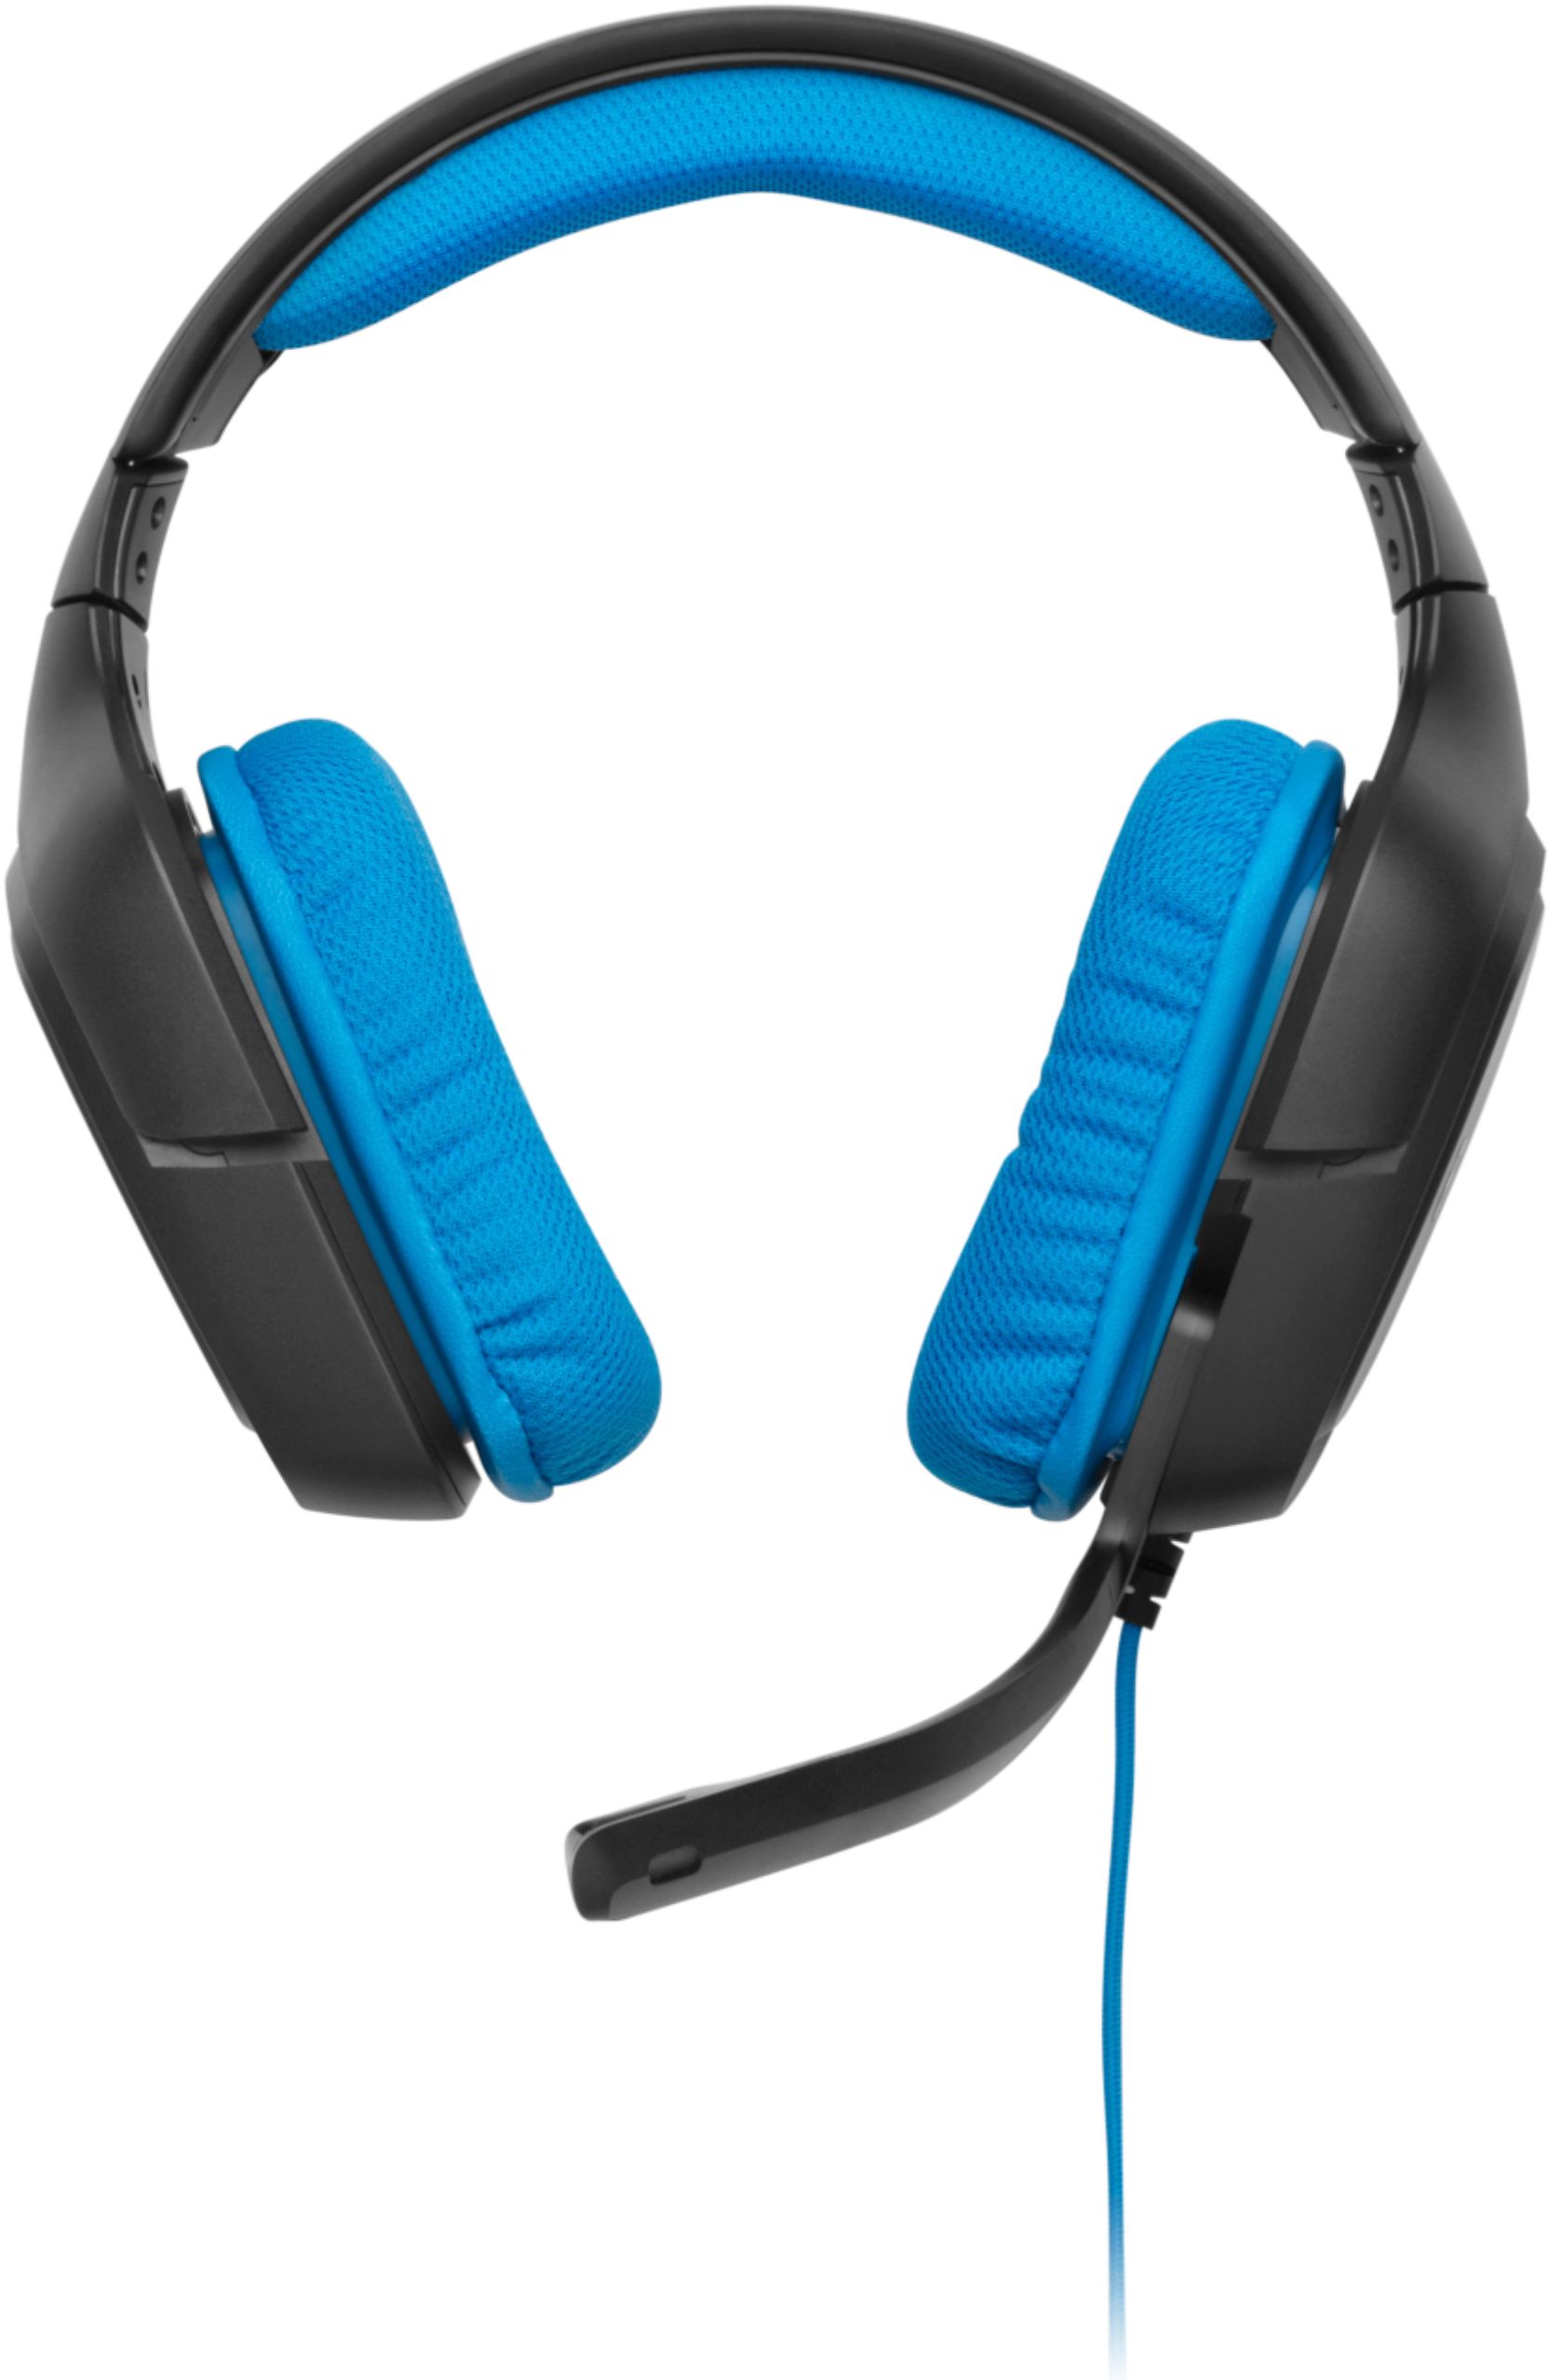 Best Buy: Over-the-Ear Gaming Headset Black 981-000536